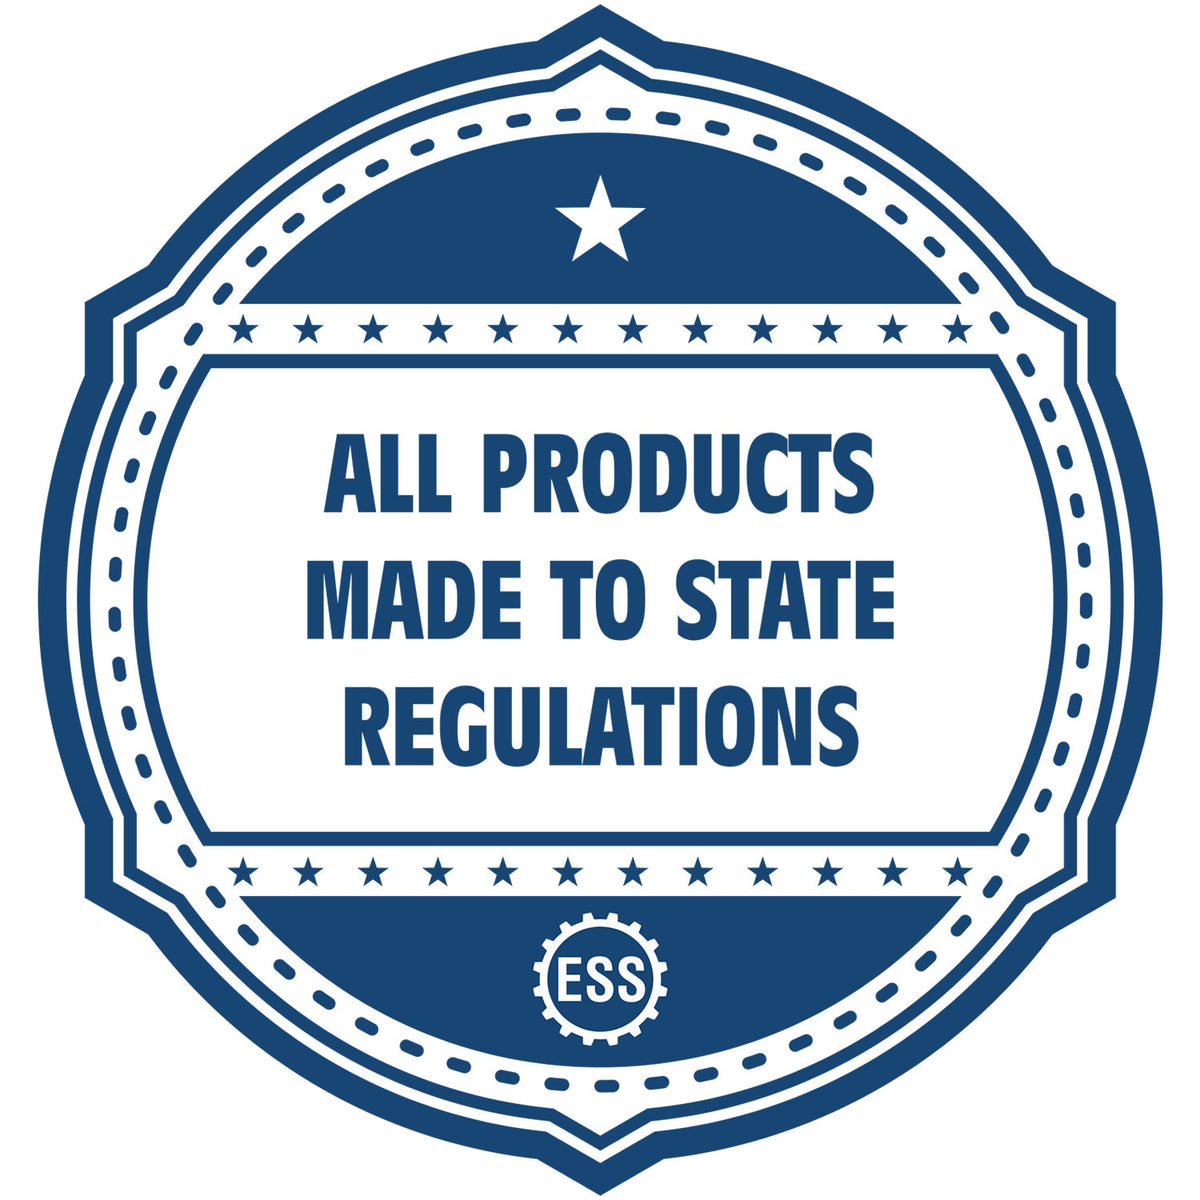 An icon or badge element for the State of Nebraska Extended Long Reach Engineer Seal showing that this product is made in compliance with state regulations.